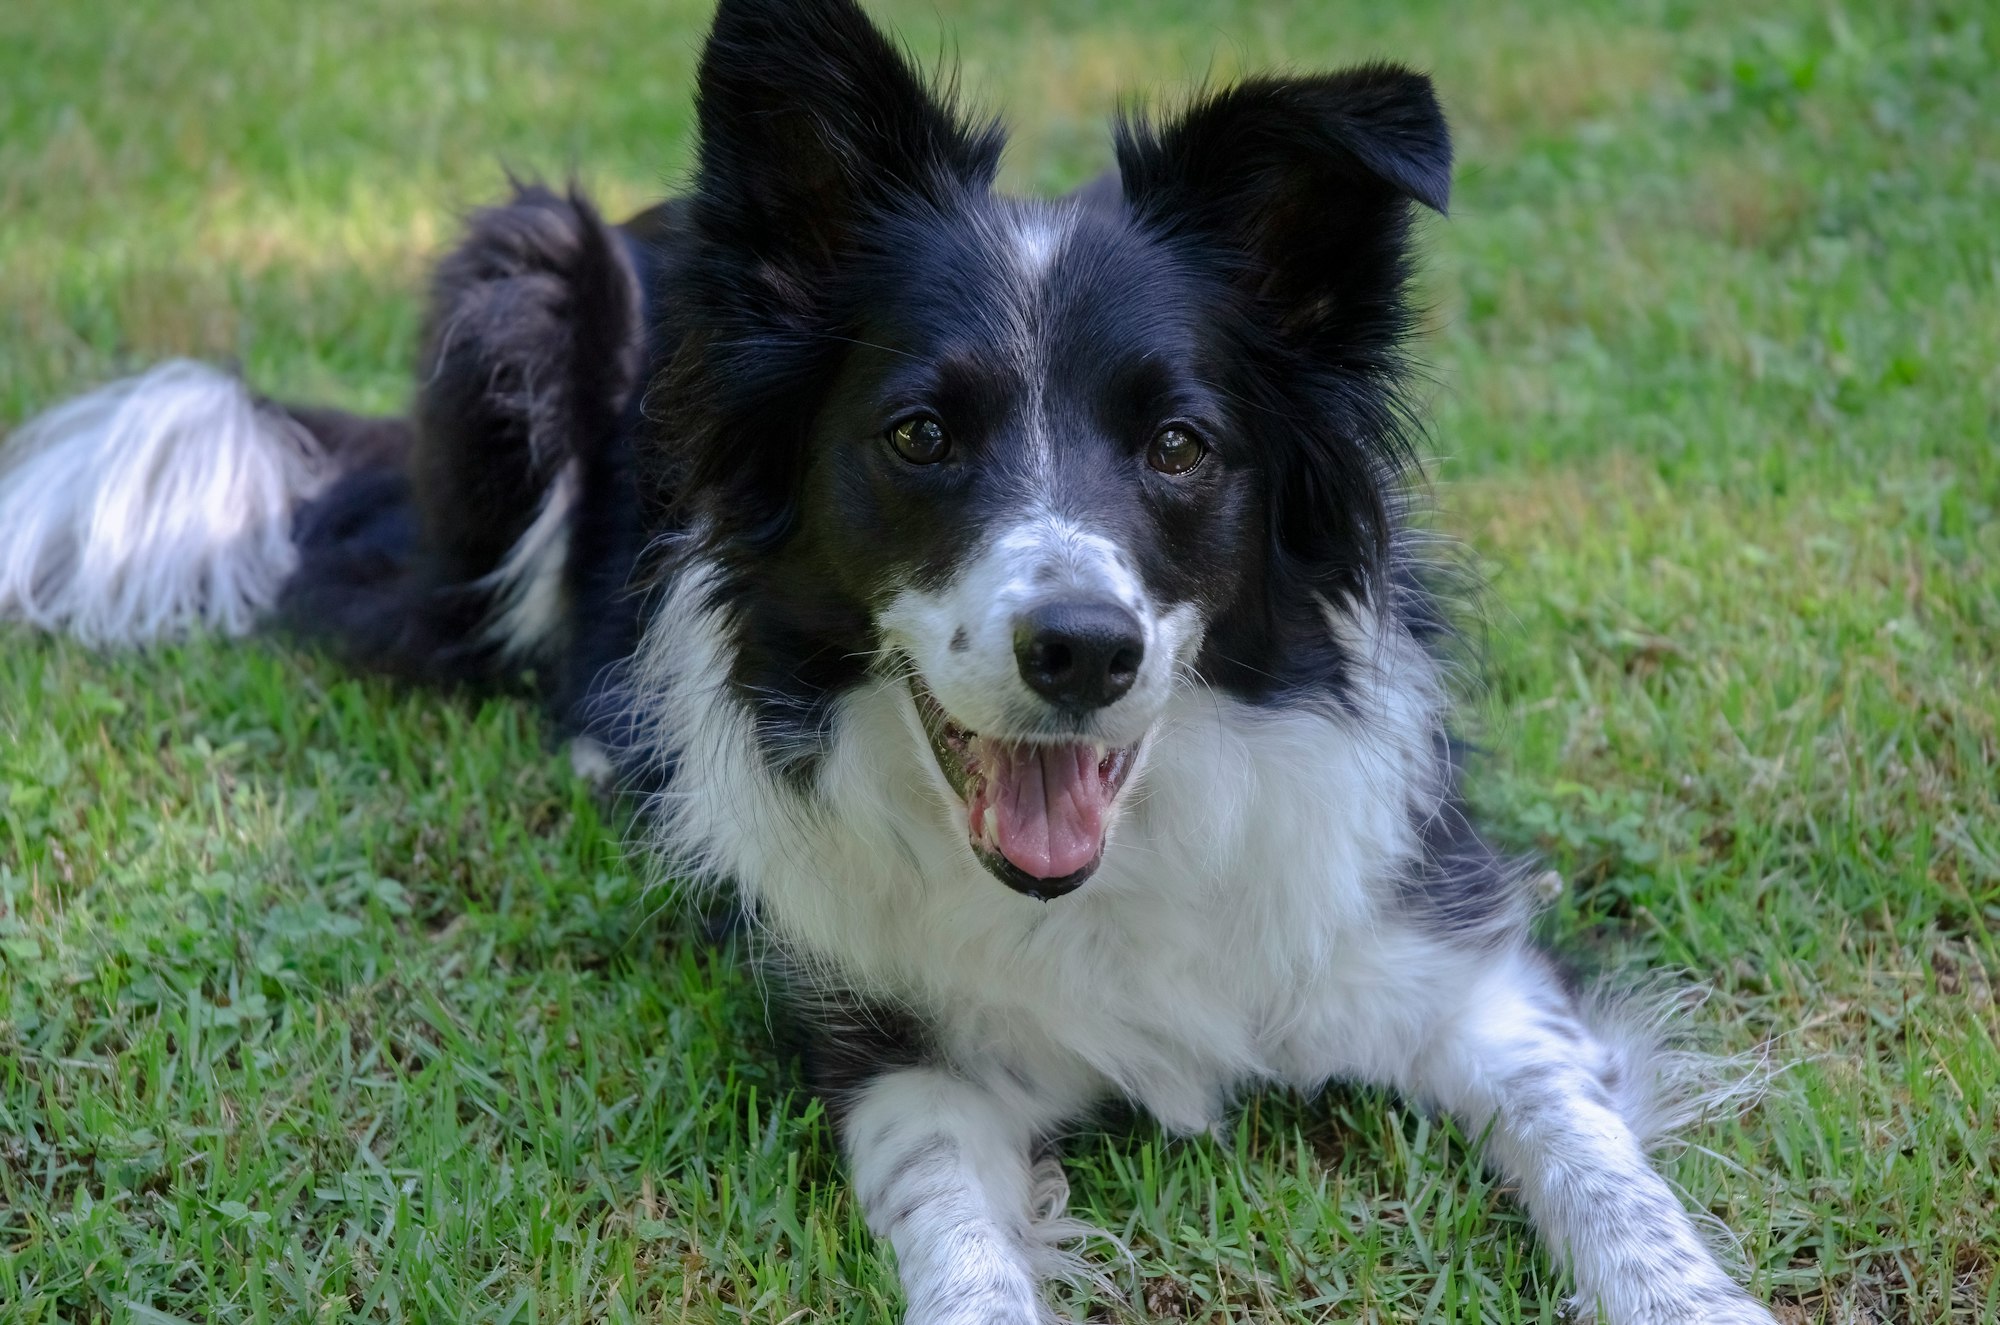 Where Are Border Collies From?